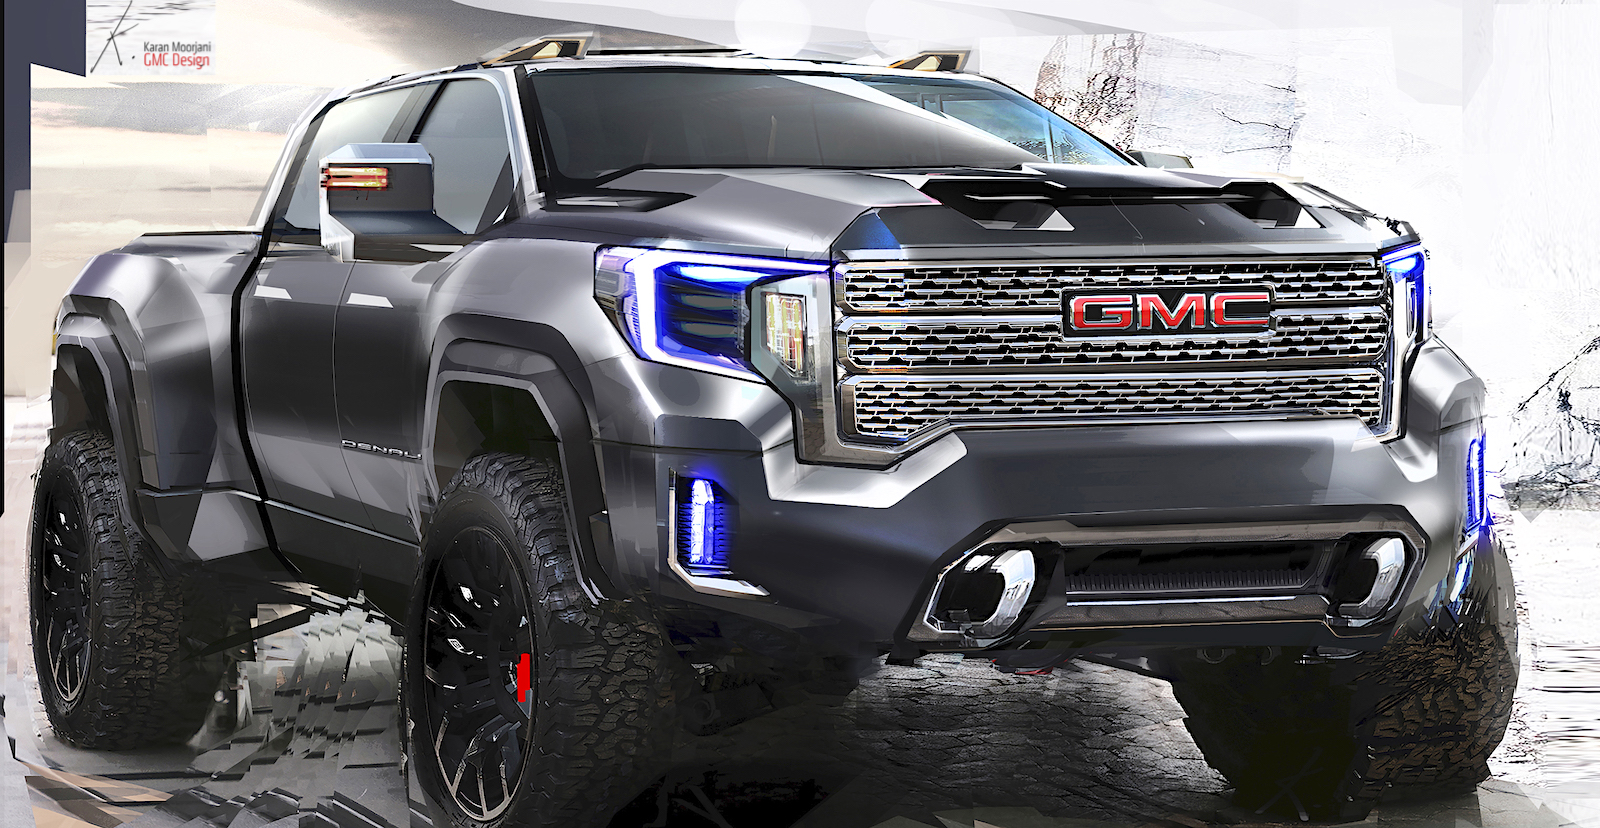 Gm Electric Truck Is Coming In The Fall Of 2021 Says Ceo News The